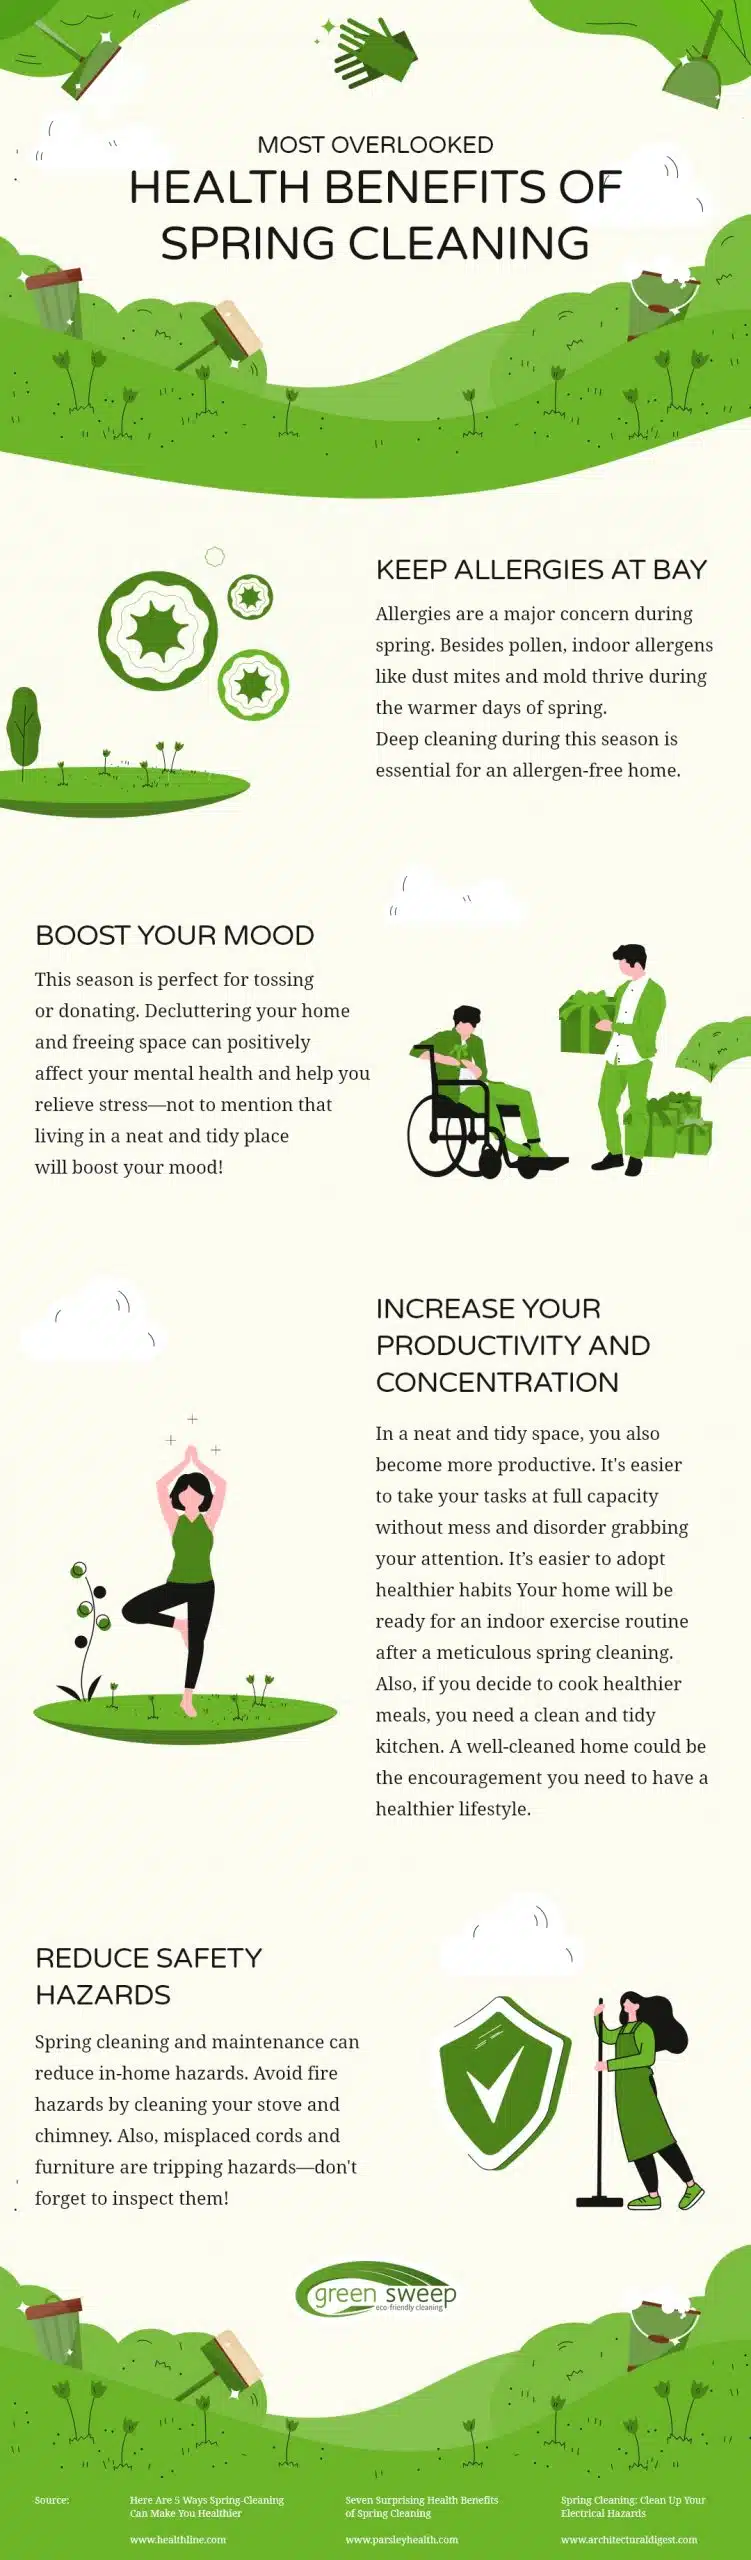 Health Benefits Of Spring Cleaning